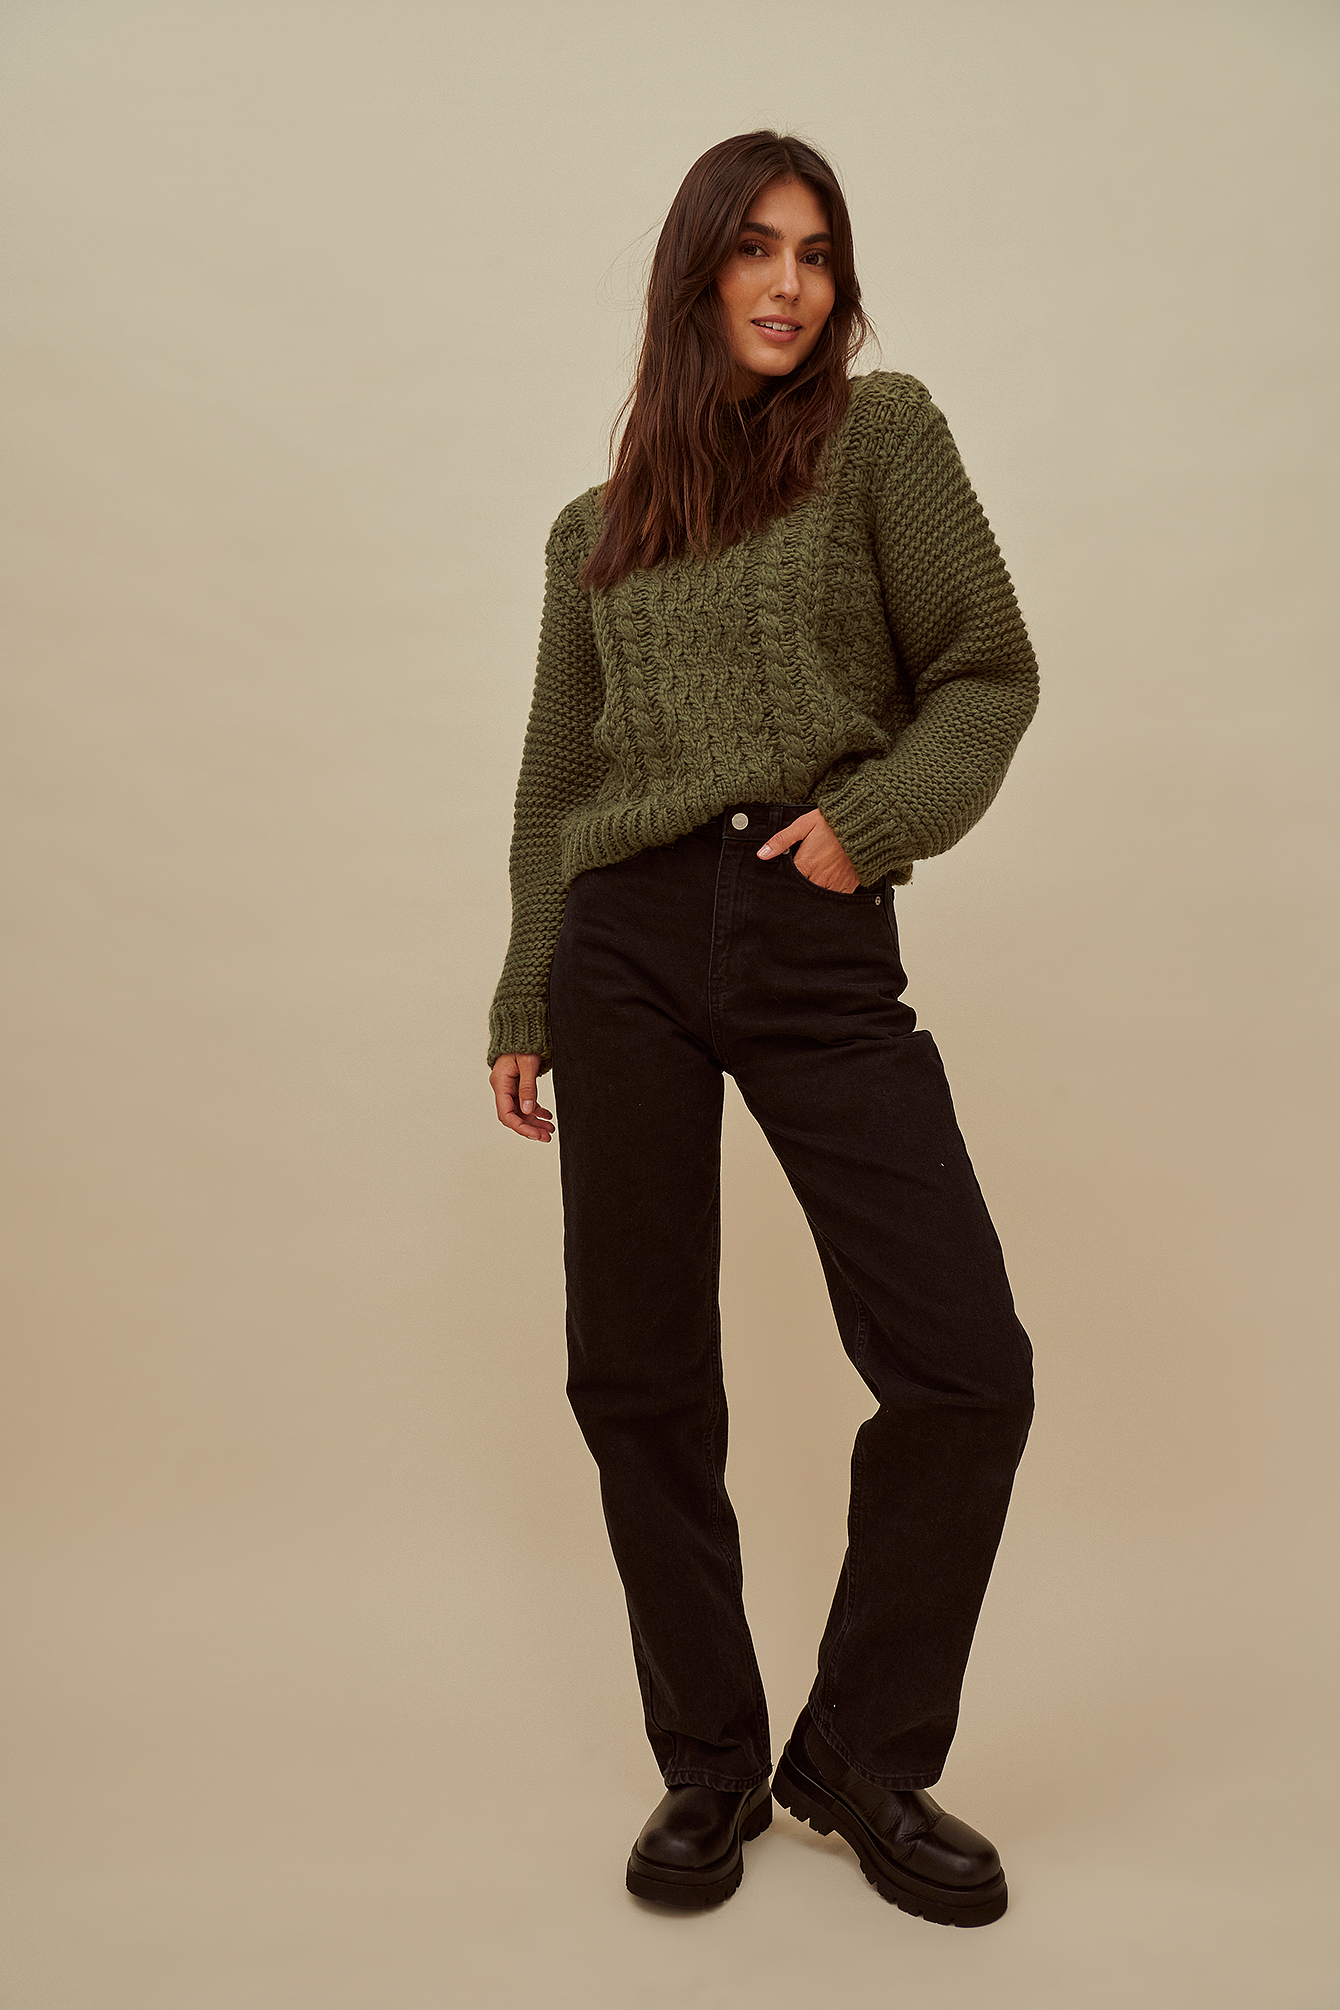 Chunky Cable Knitted Sweater Outfit.